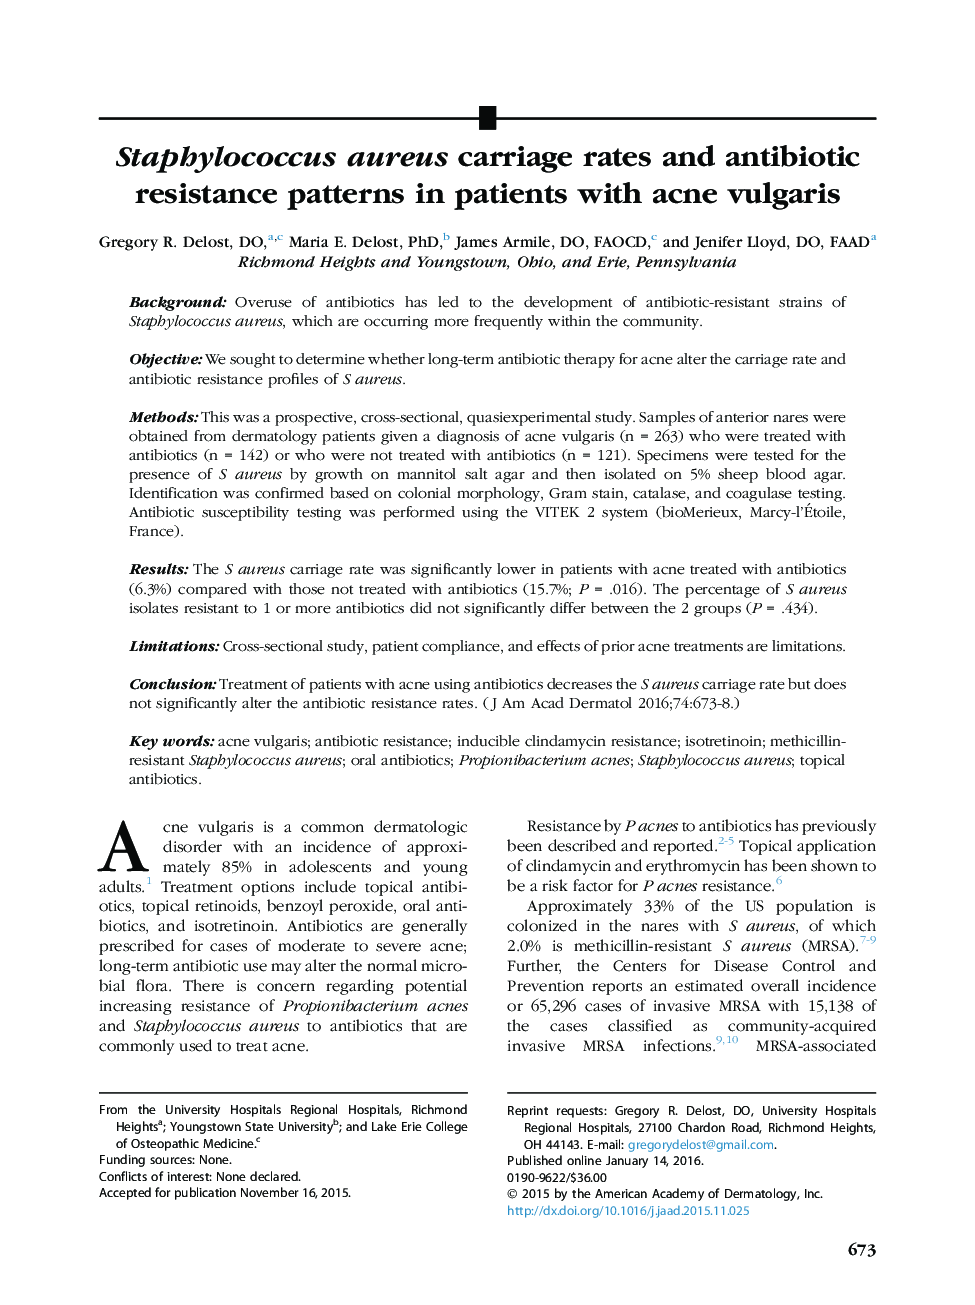 Staphylococcus aureus carriage rates and antibiotic resistance patterns in patients with acne vulgaris 